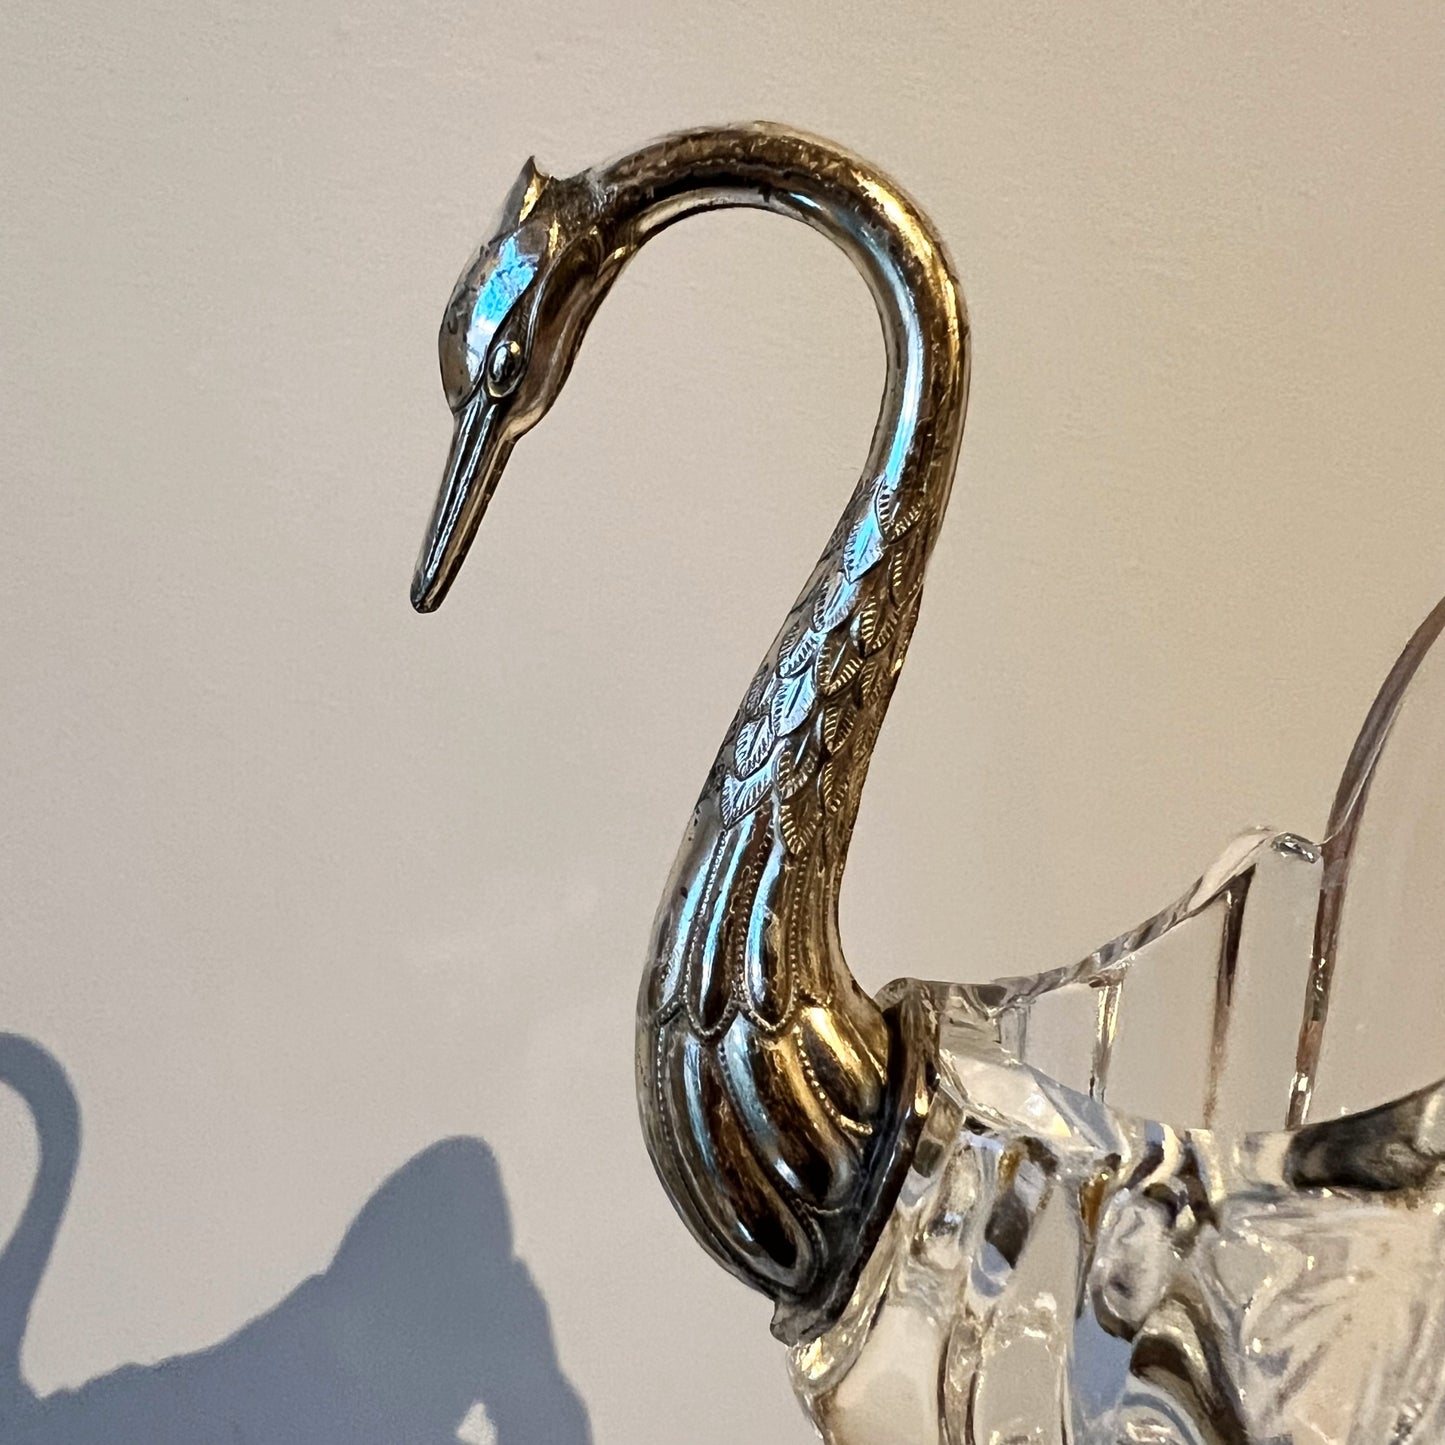 【Vintage】France Silver Plate Glass Swan（14㎝）